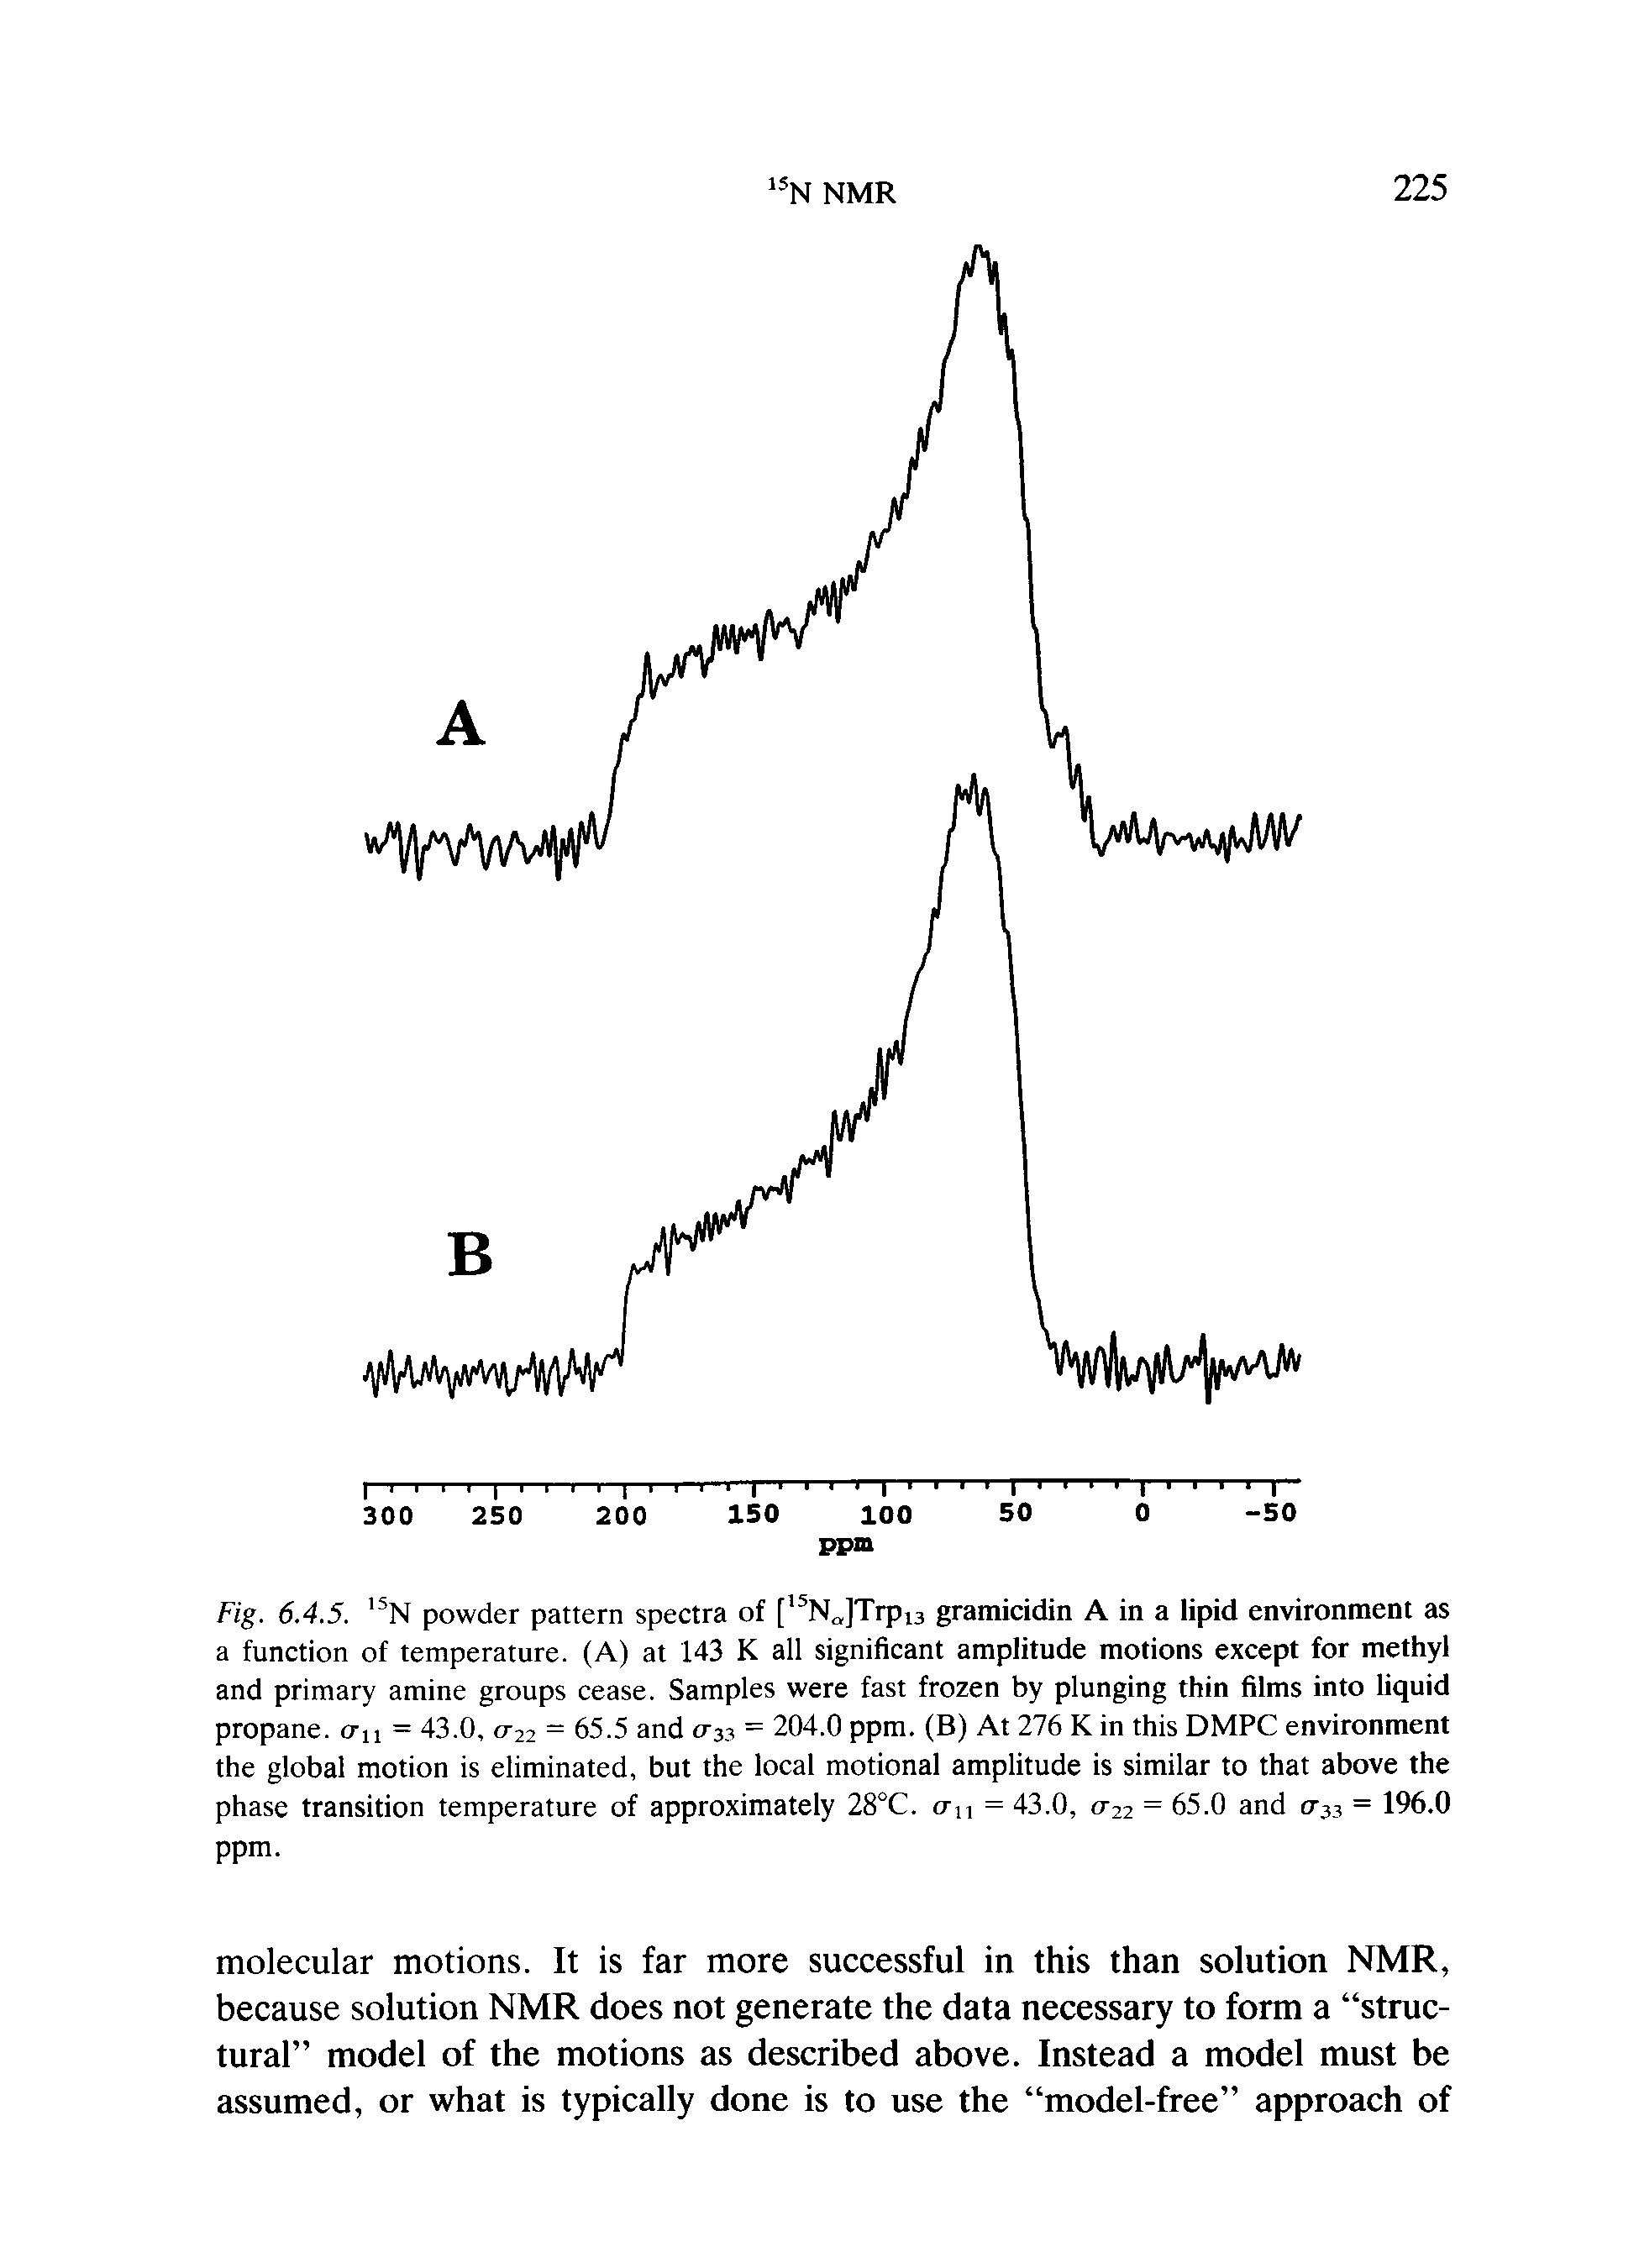 Fig. 6.4.5. N powder pattern spectra of [ N ]Trpi3 gramicidin A in a lipid environment as a function of temperature. (A) at 143 K all significant amplitude motions except for methyl and primary amine groups cease. Samples were fast frozen by plunging thin films into liquid propane. <tu = 43.0, 0-22 - 65.5 and 0-33 = 204.0 ppm. (B) At 276 K in this DMPC environment the global motion is eliminated, but the local motional amplitude is similar to that above the phase transition temperature of approximately 28°C. cr, = 43.0, 0-22 = 65.0 and 0-33 = 196.0 ppm.